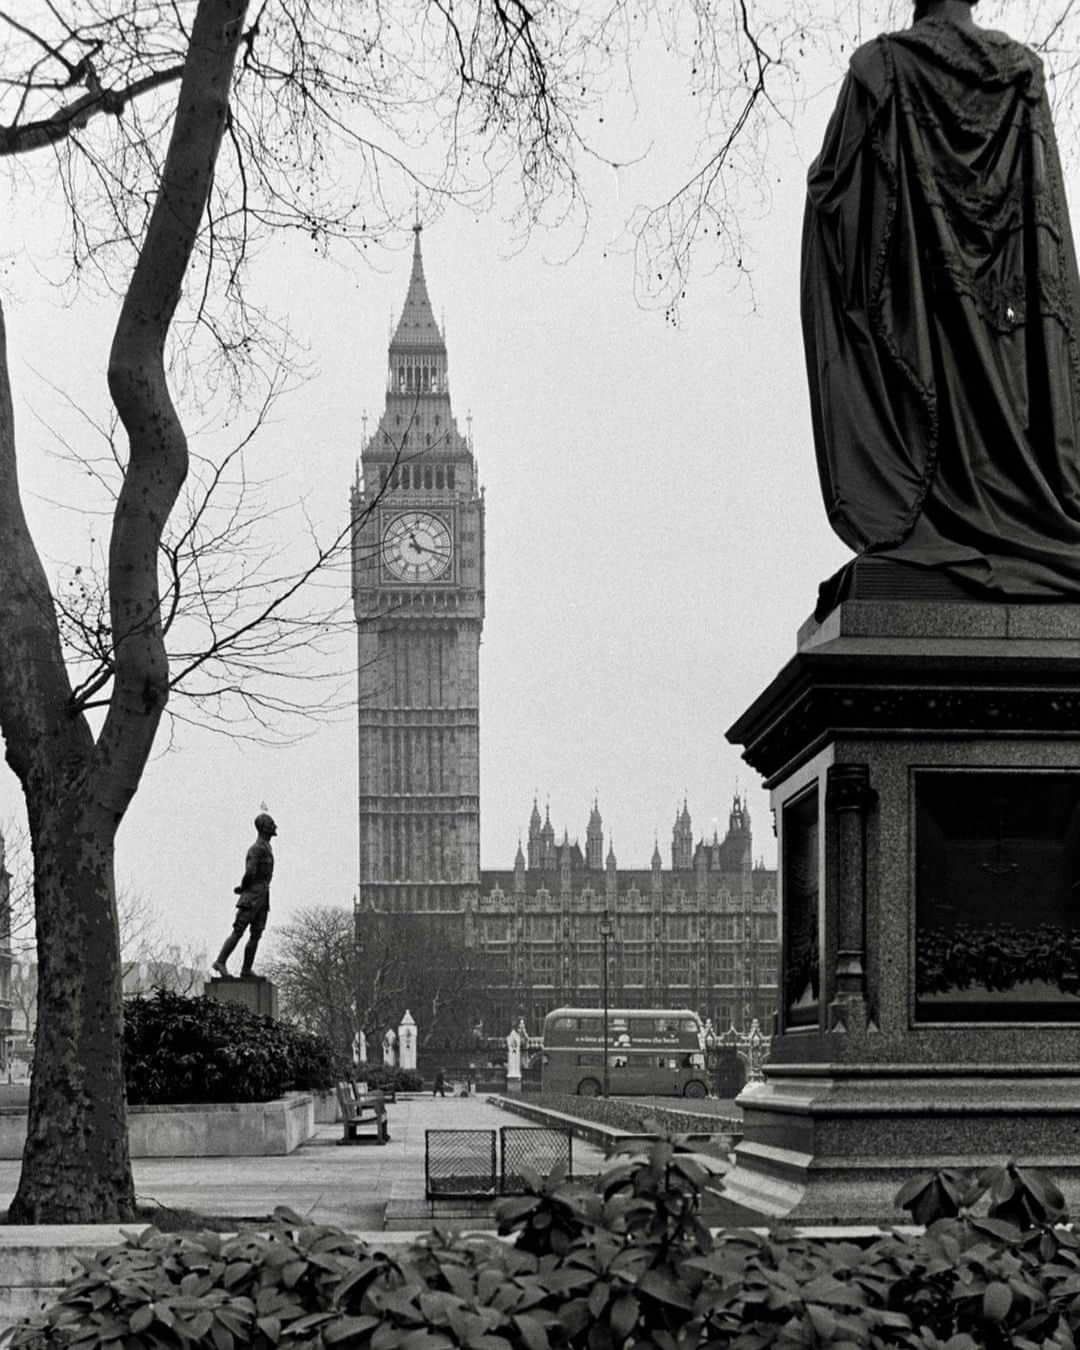 lifeのインスタグラム：「View of the north end of the Palace of Westminster as seen from Parliament Square Garden - London, England.   Celebrate #TravelTuesday with more destinations from the LIFE archive - click the link in bio!   (📷 Alfred Eisenstaedt/LIFE Picture Collection)   #LIFEMagazine #LIFEArchive #AlfredEisenstaedt #London #England #PalaceofWestminster #Destinations」